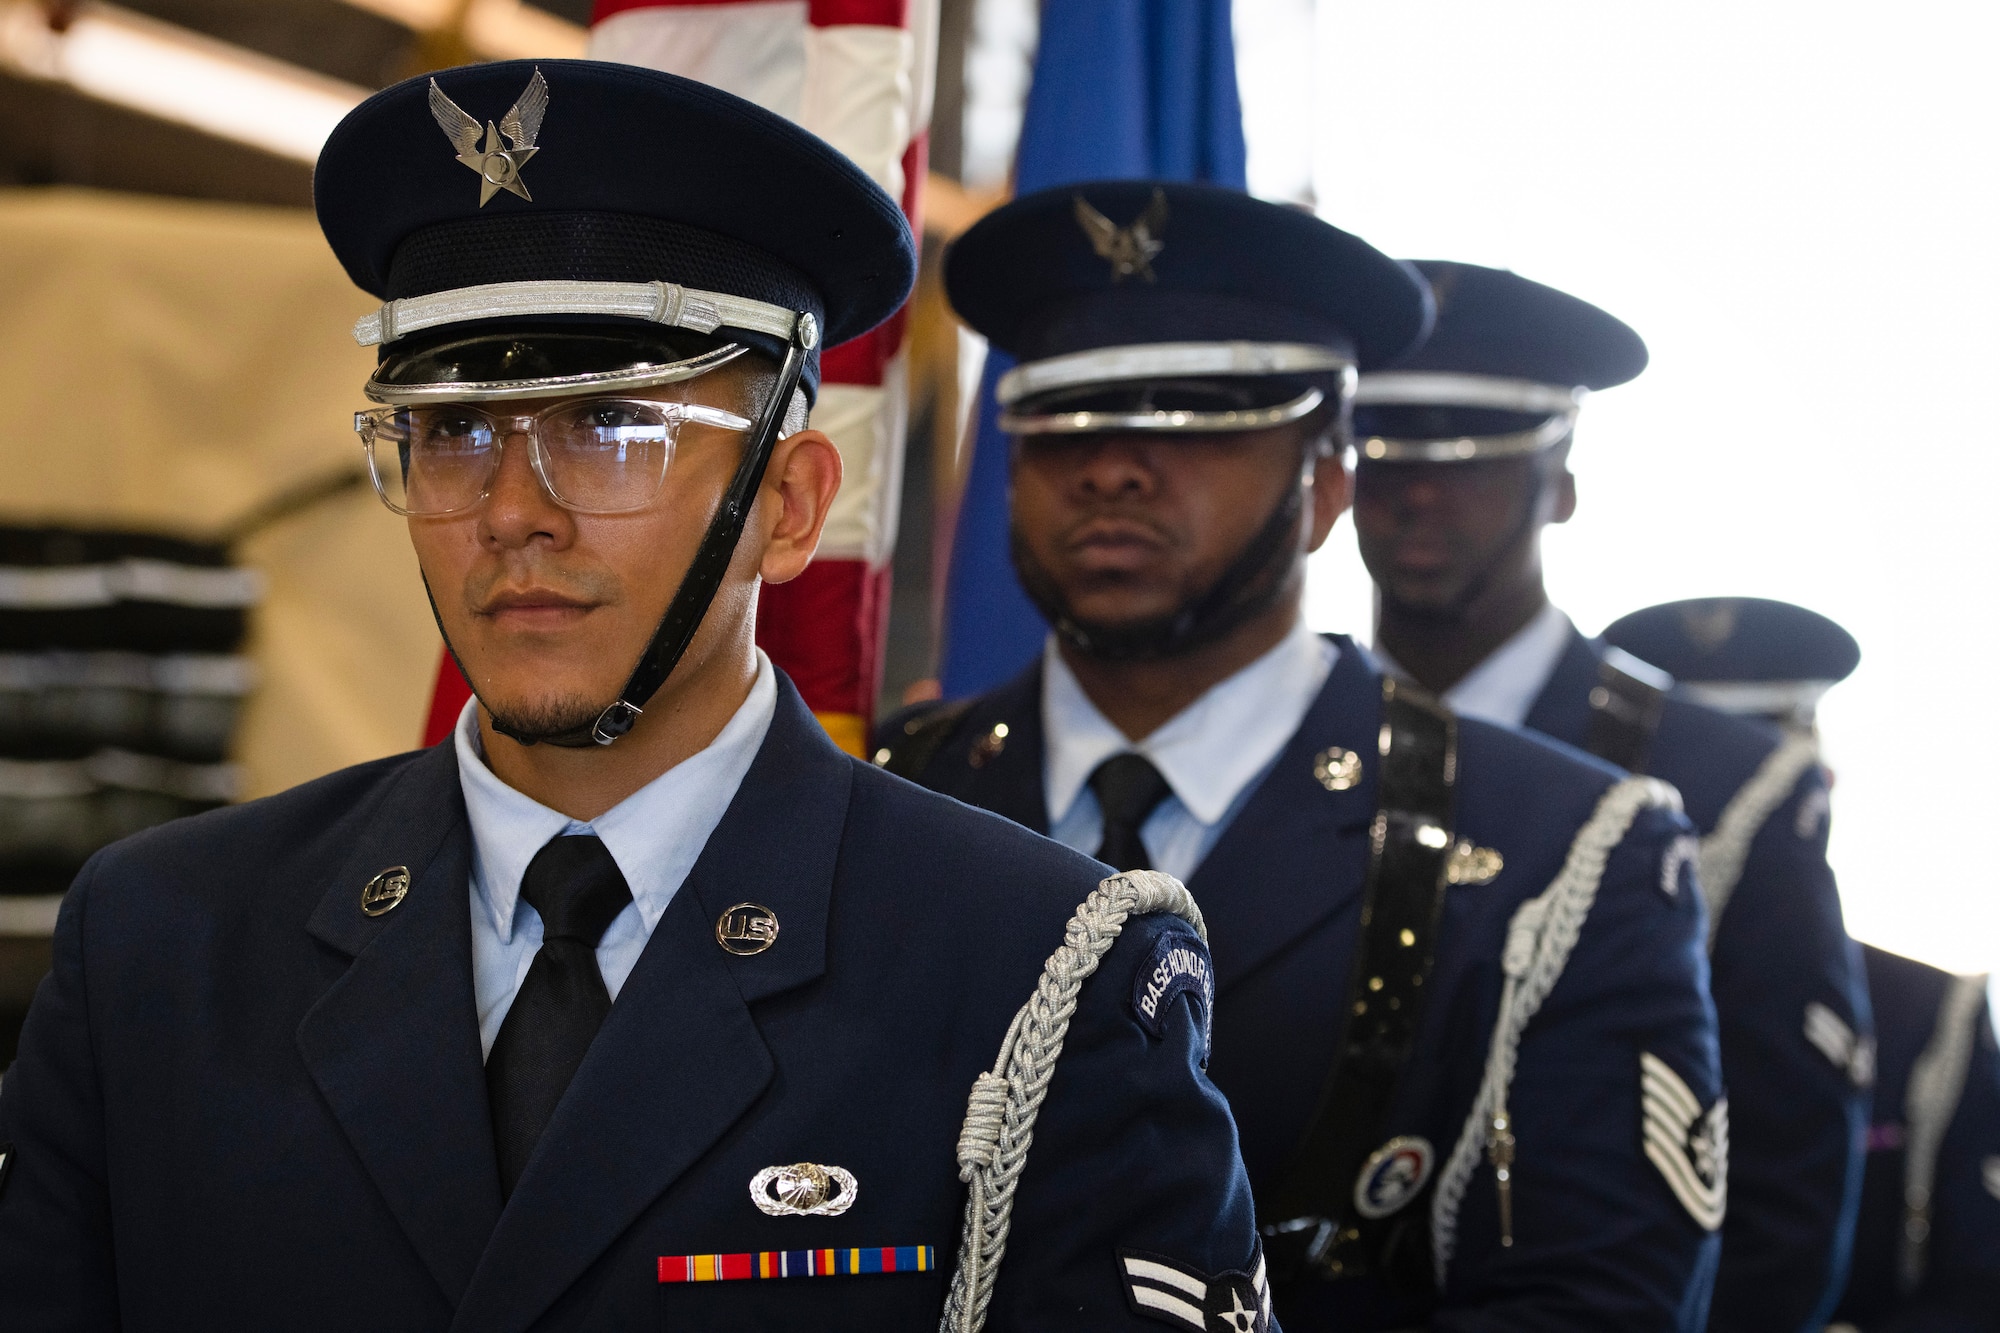 U.S. Air Force members stand in formation